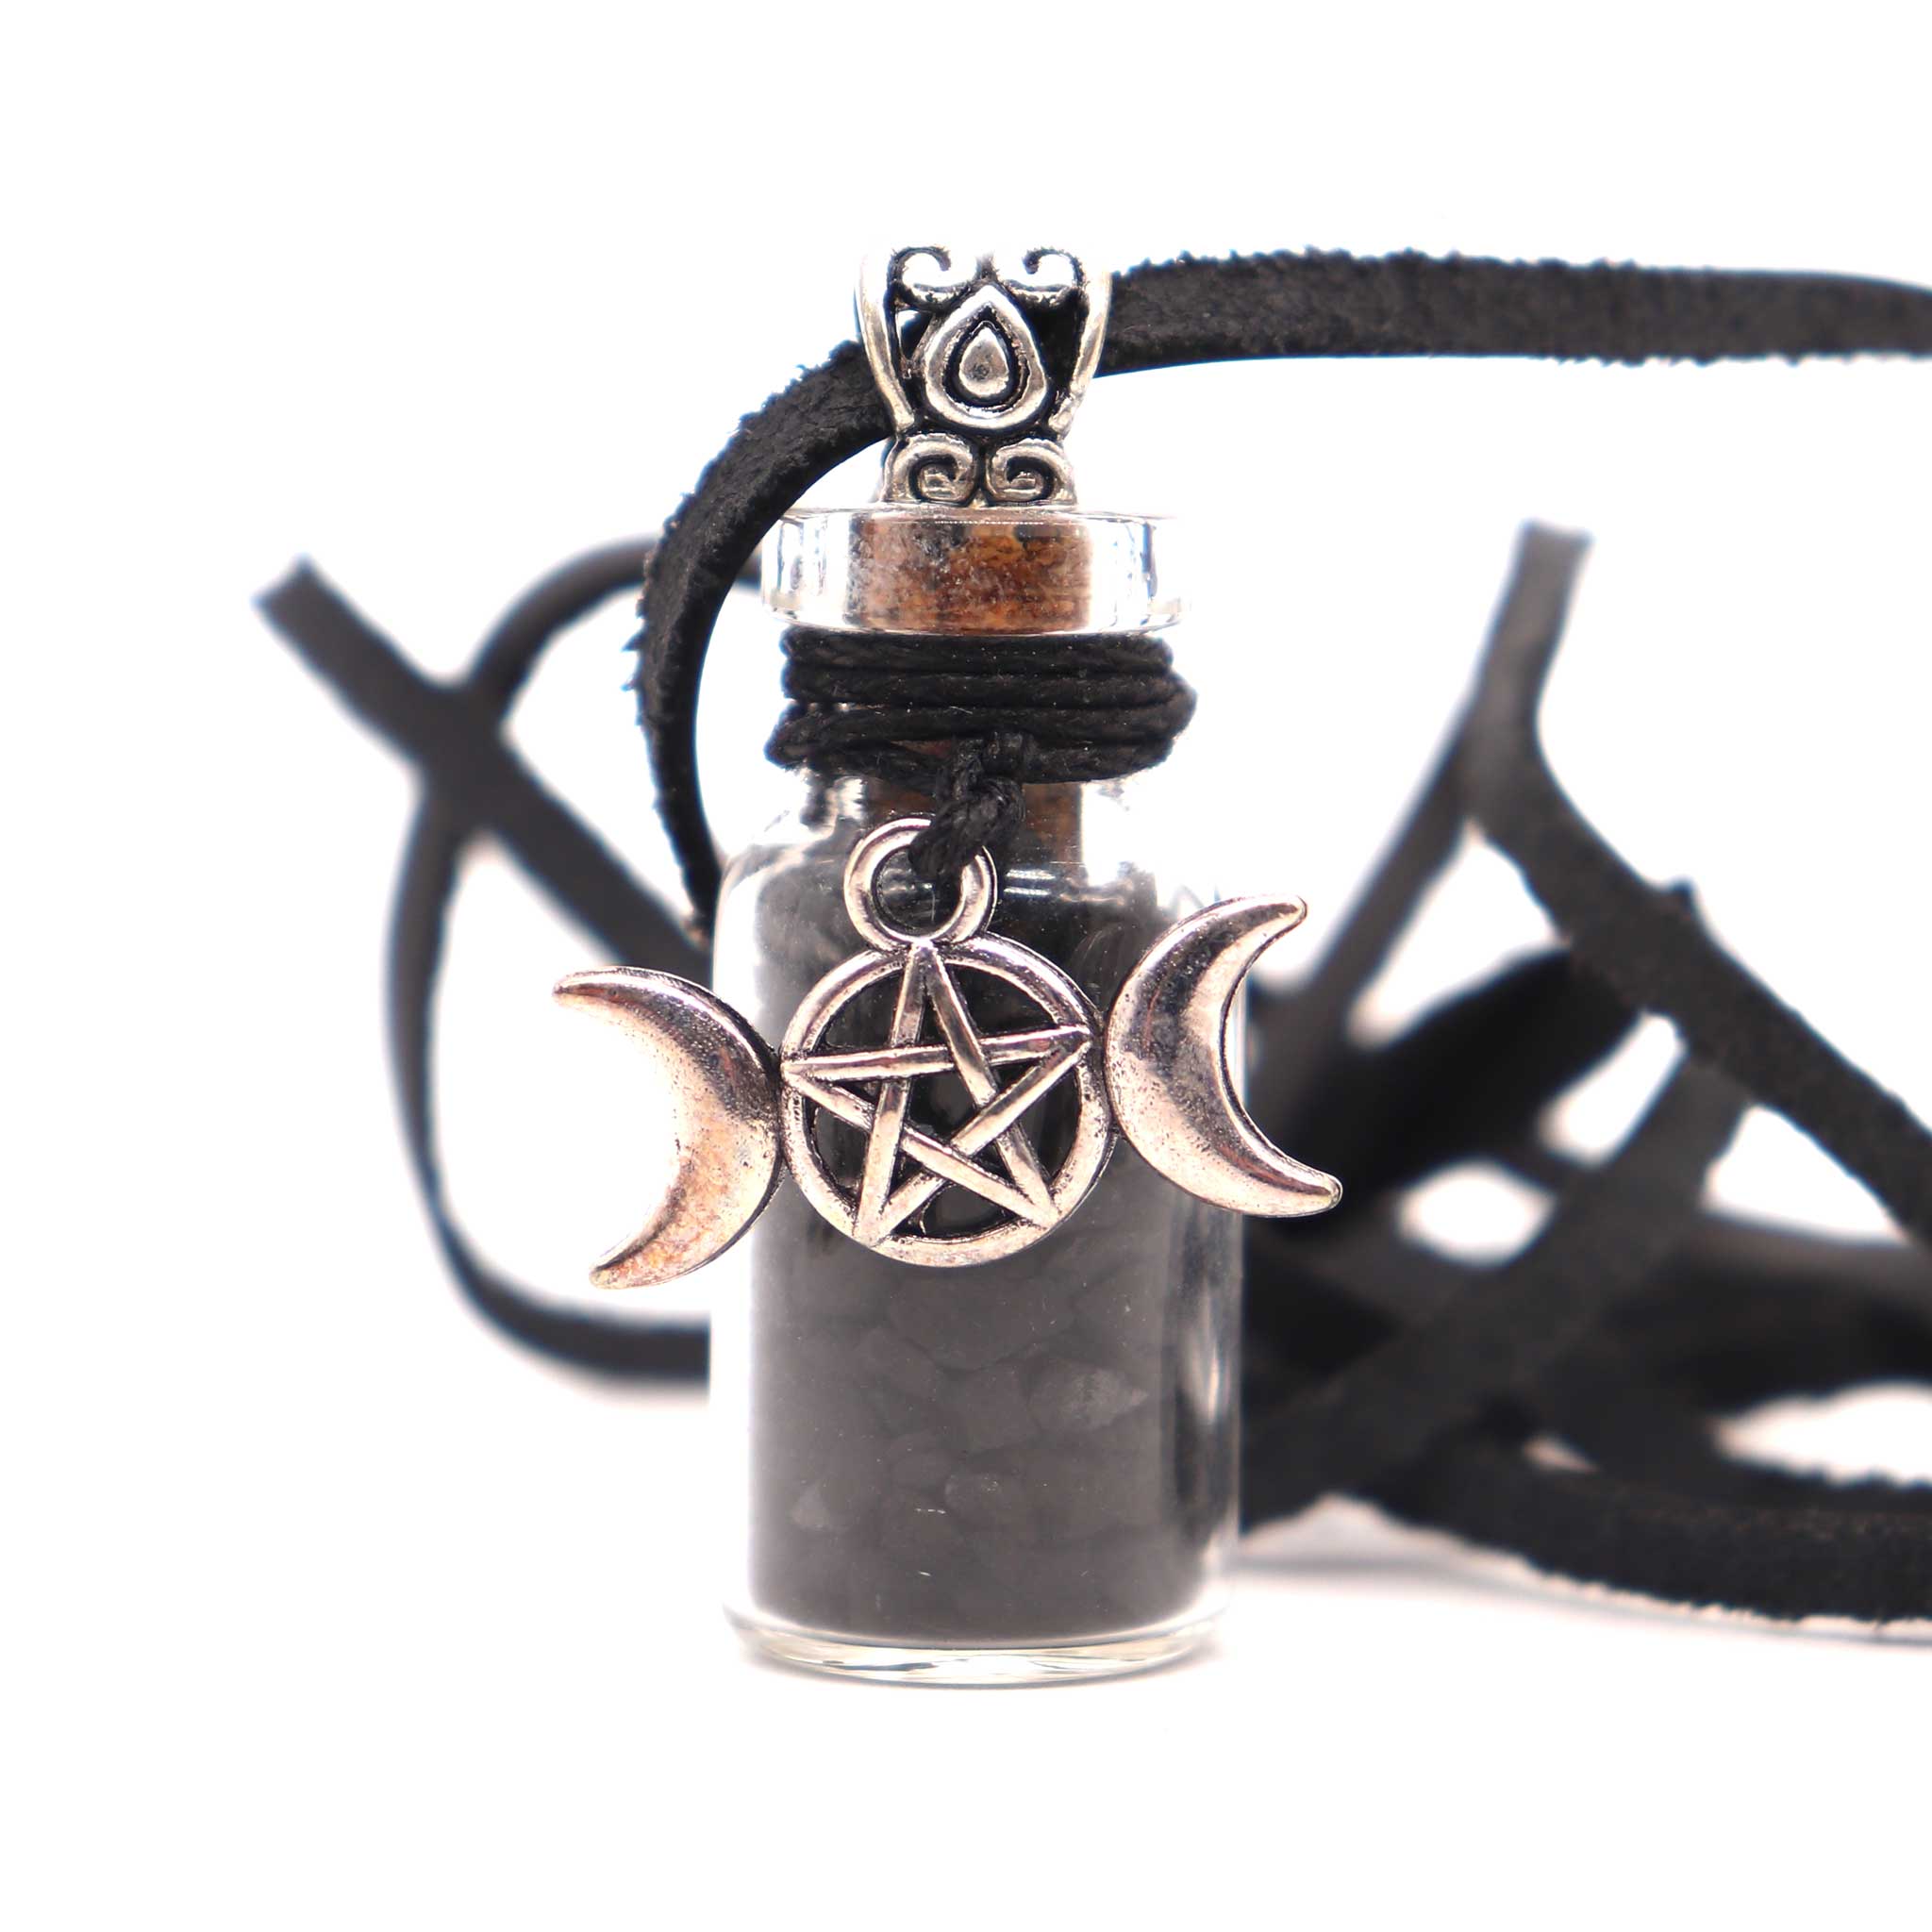 Witch Charms with Broom, Pagan Charm Set, Witchcraft, Pentacle, Triple Moon